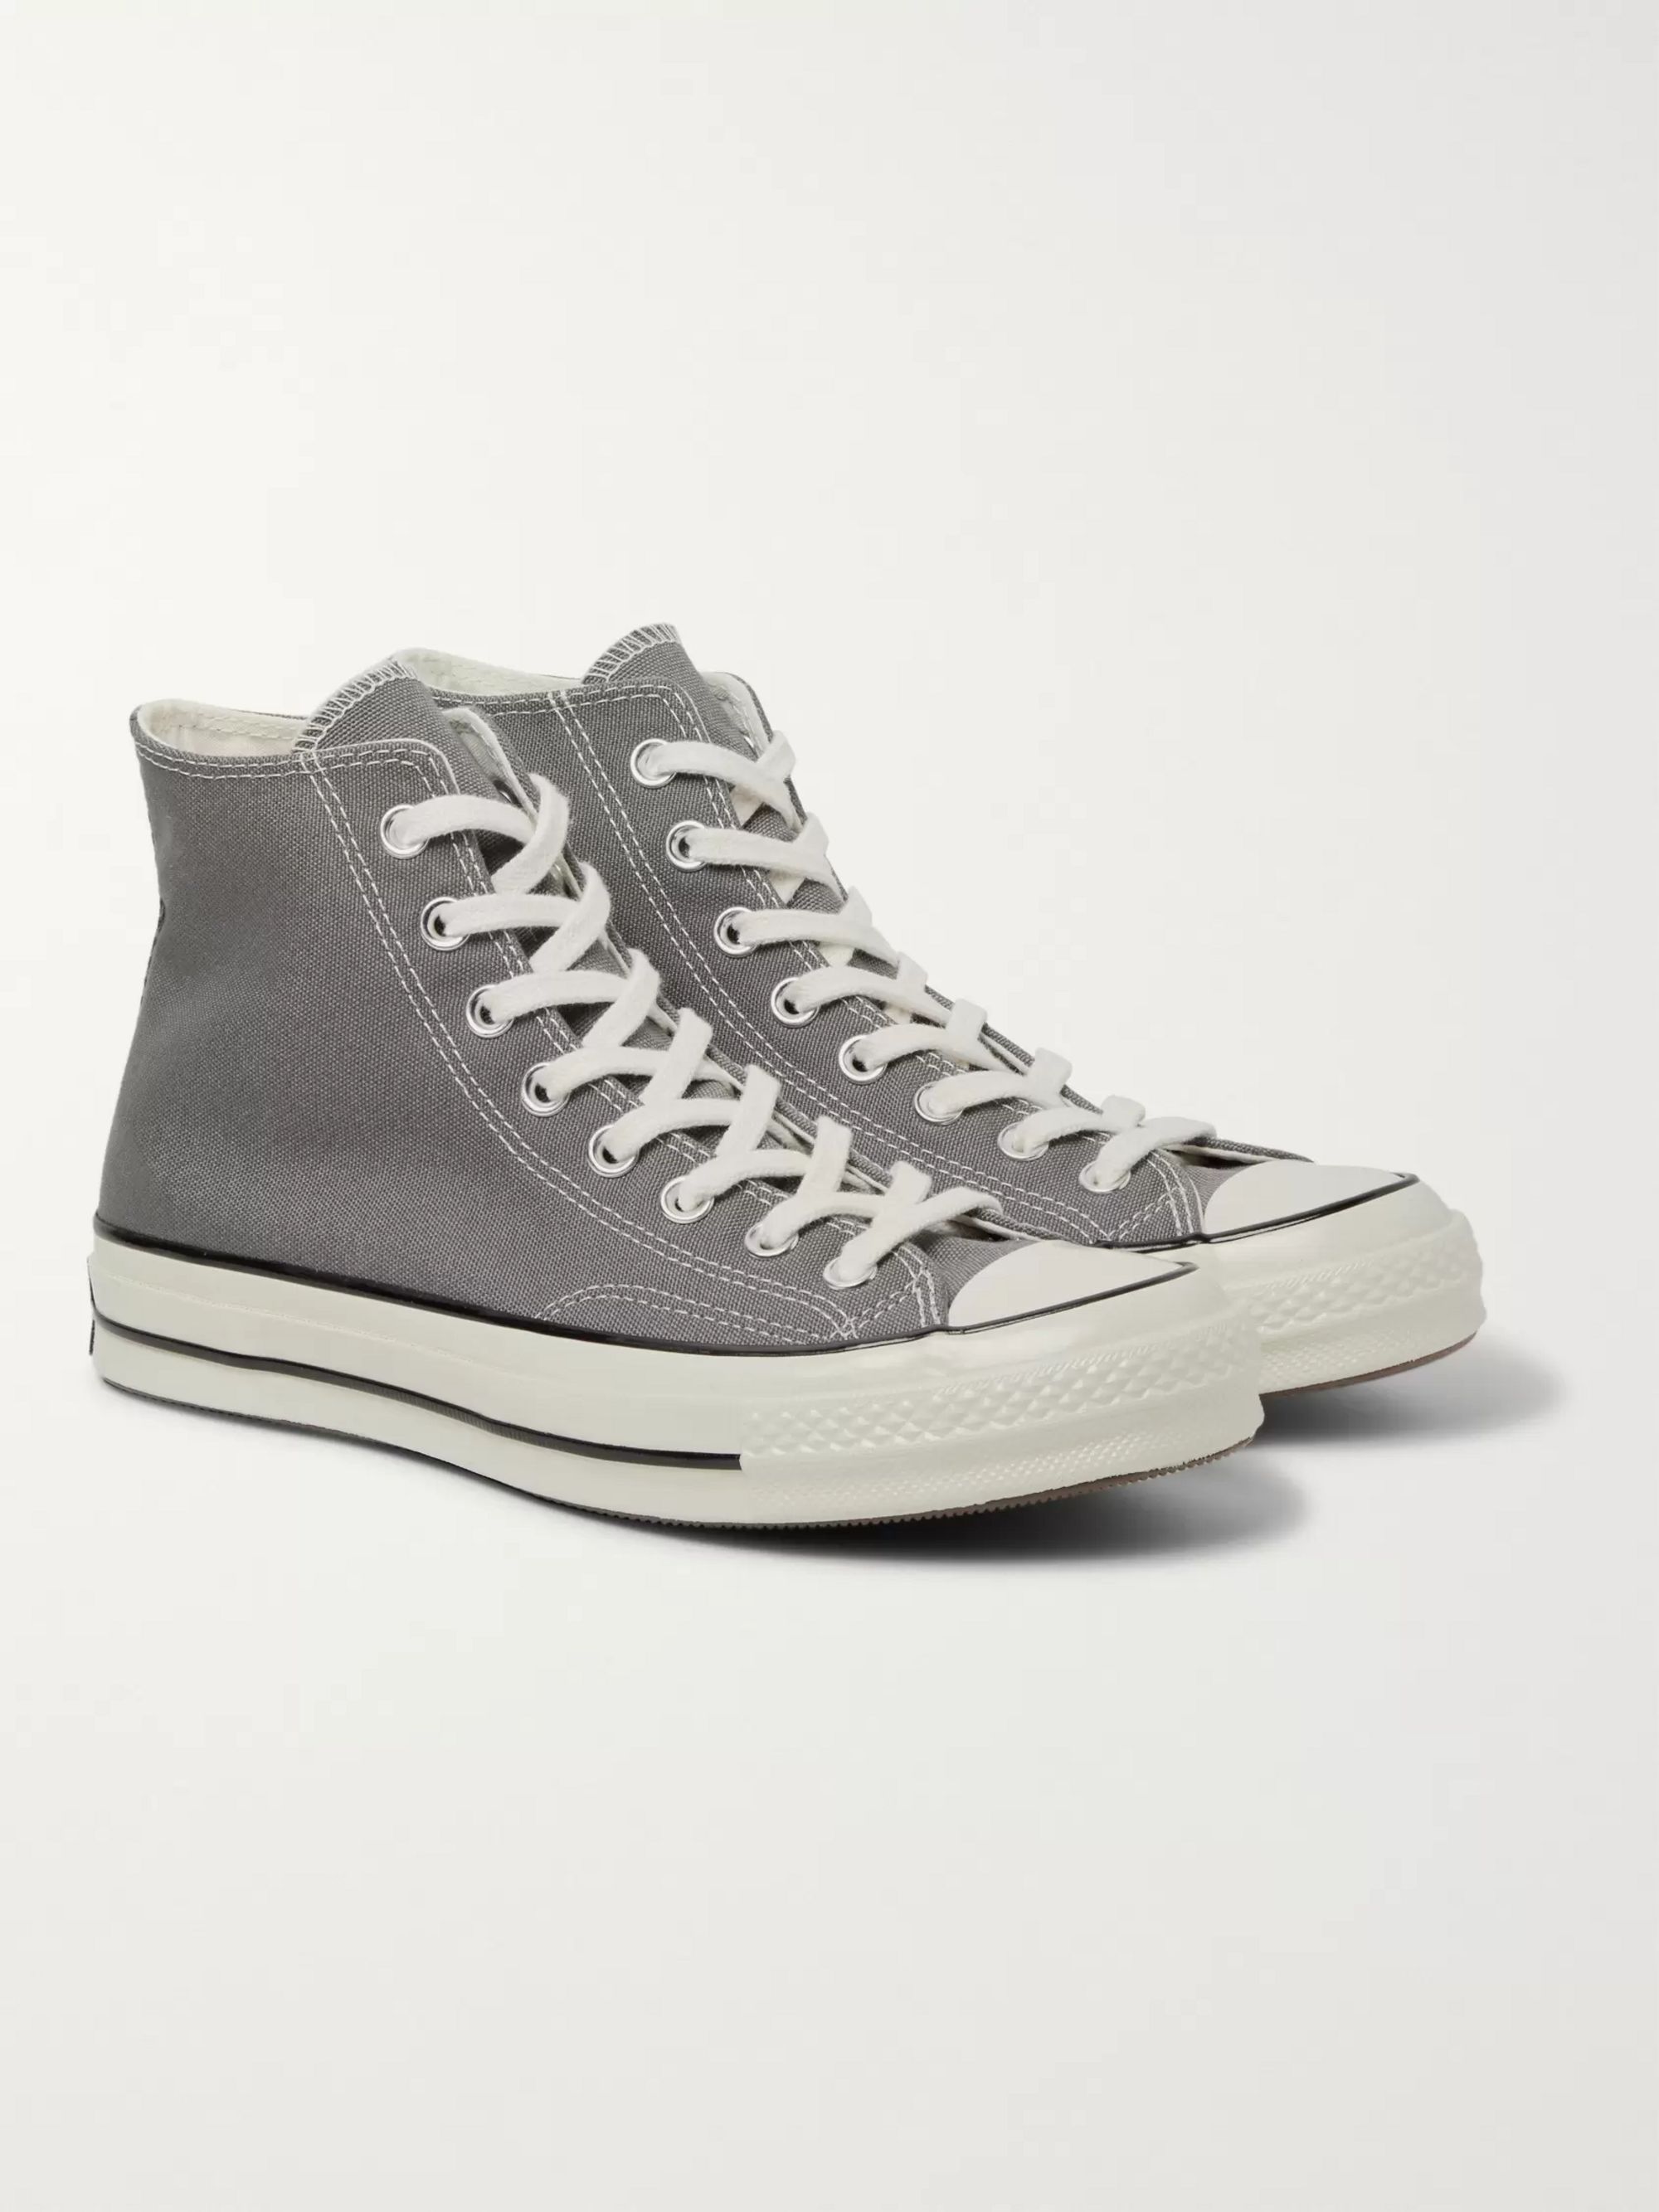 black and grey converse high tops 